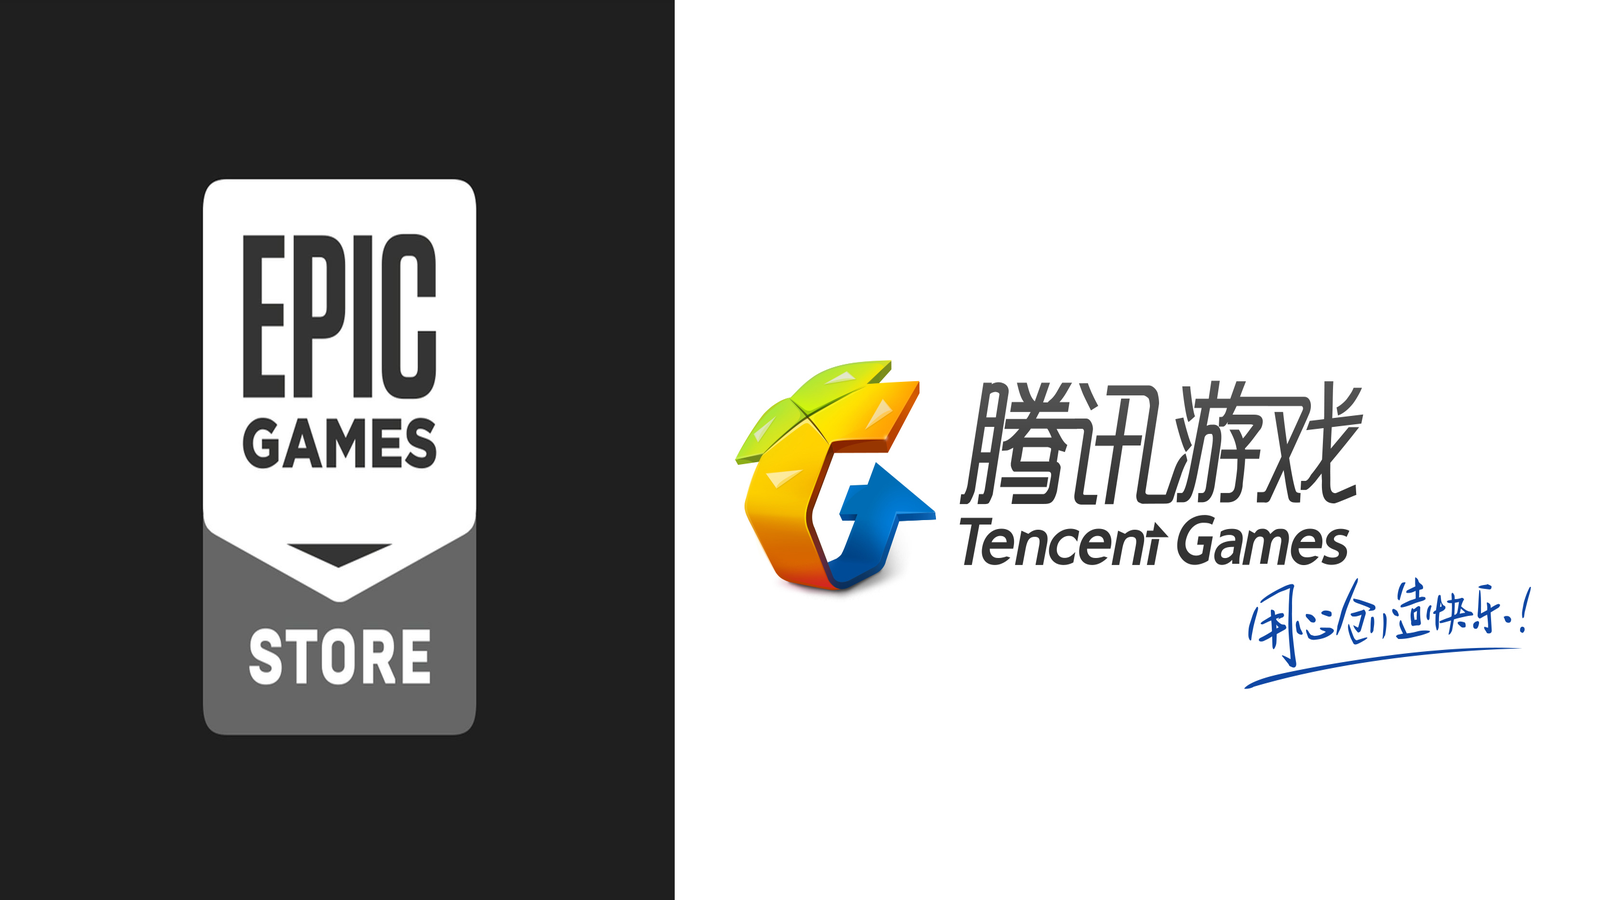 Epic Games Store quietly opens shop in China